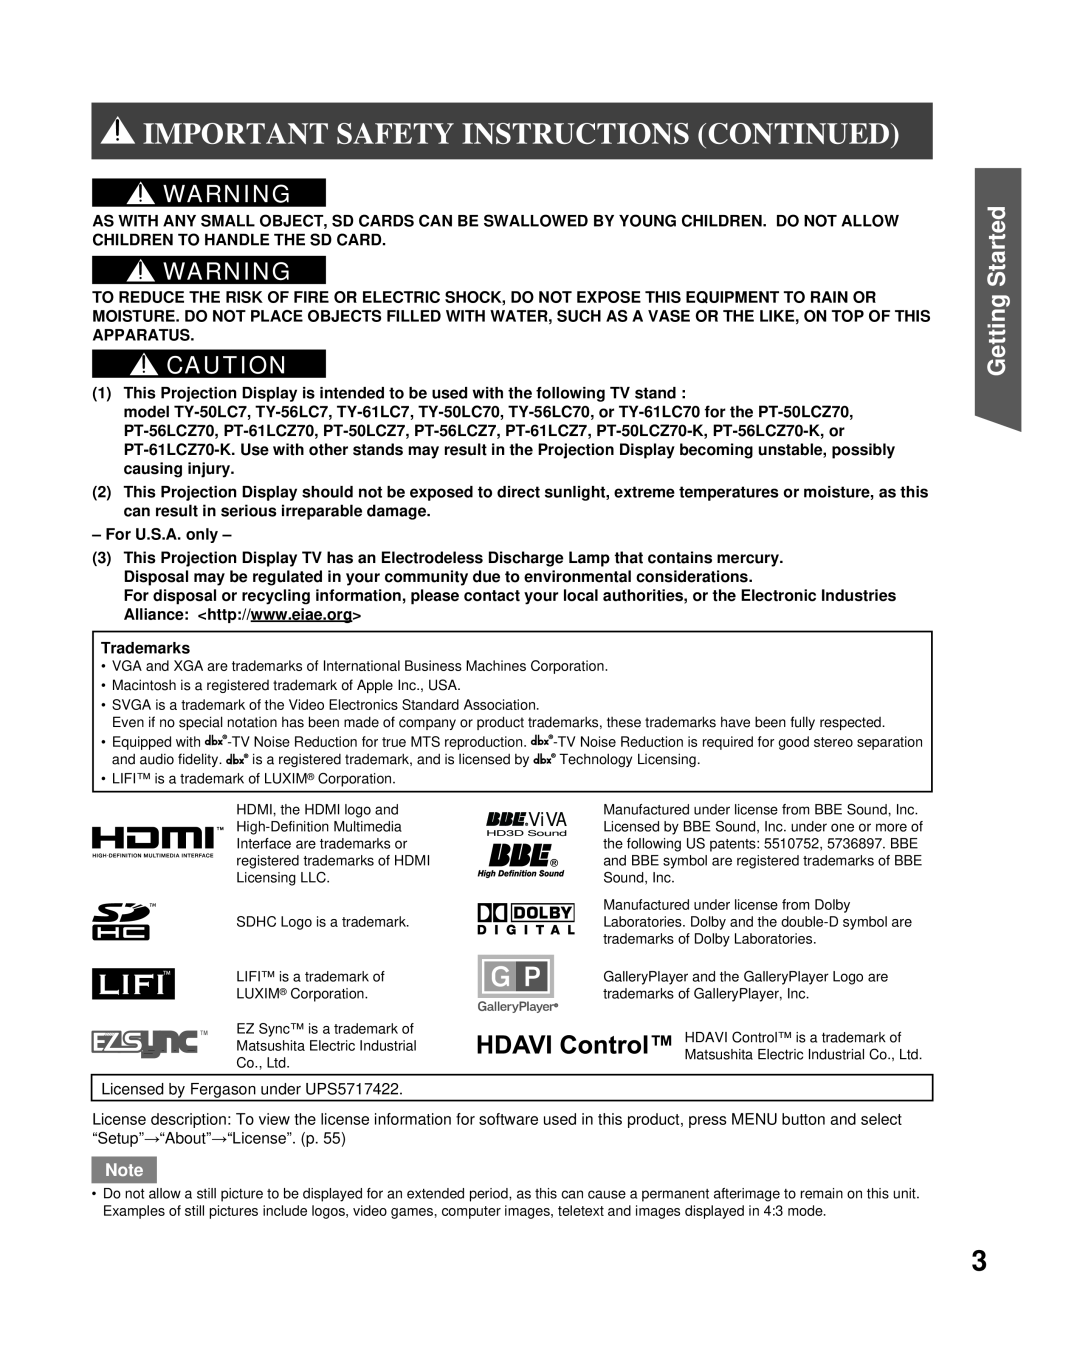 Panasonic PT-50LCZ70 Important Safety Instructions Continued, Getting Started, ViVA, For U.S.A. only, Trademarks 